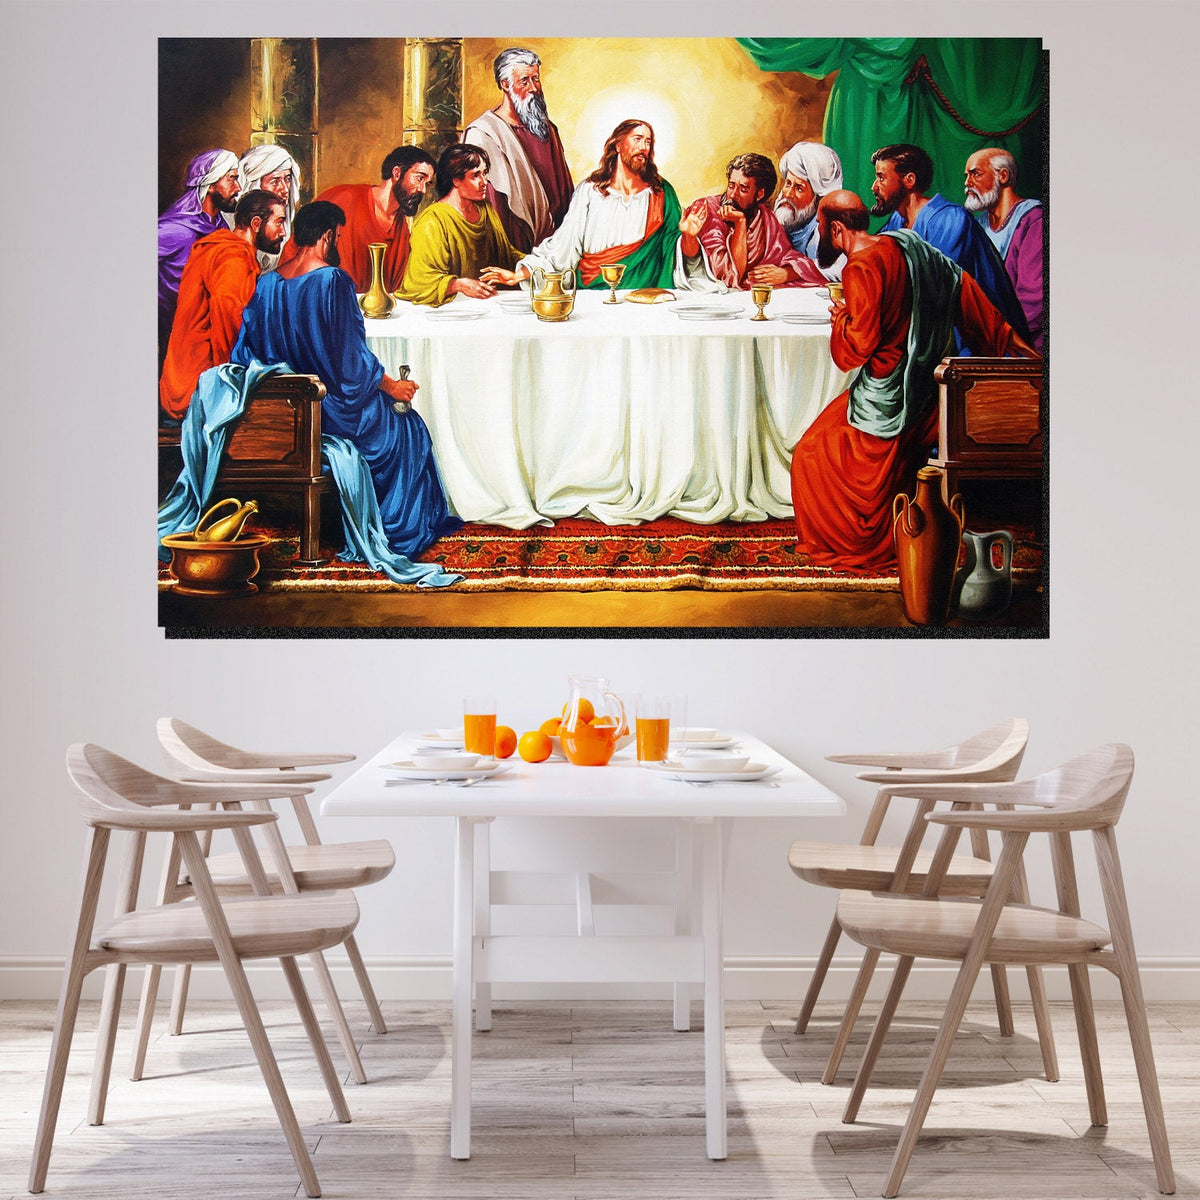 https://cdn.shopify.com/s/files/1/0387/9986/8044/products/TheLastSupperCanvasArtprintStretched-1.jpg